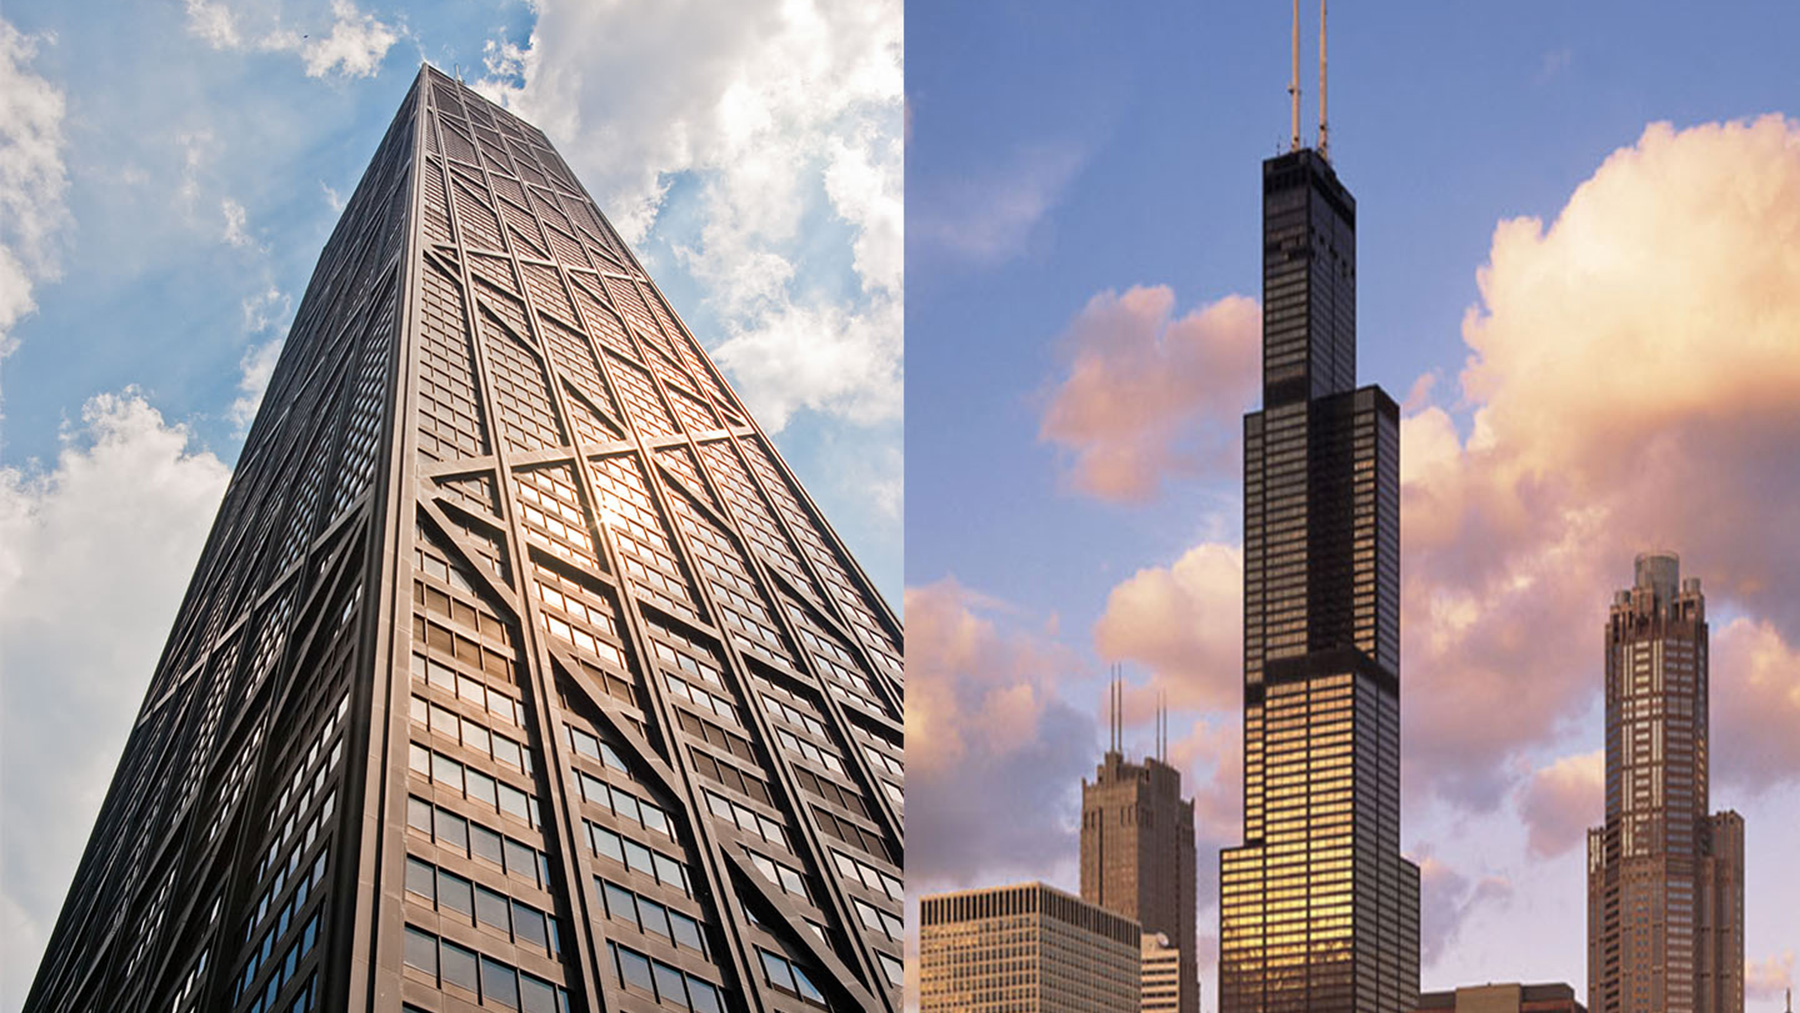 the skyscrapers formerly known as Sears Tower and the John Hancock building